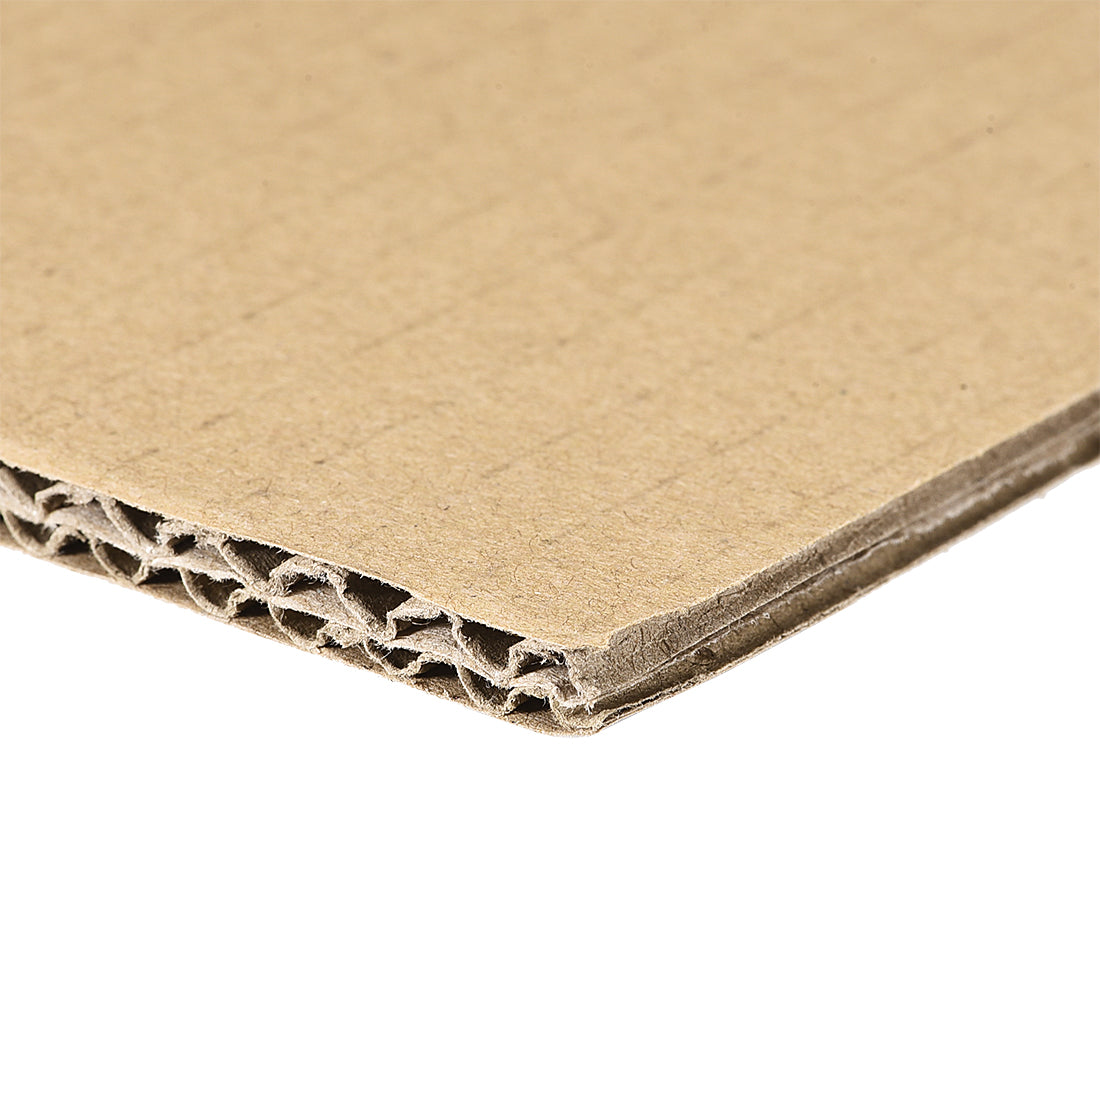 uxcell Uxcell Corrugated Cardboard Filler Insert Sheet Pads 5-Layer 5mm x 14 x 18-Inch 4pcs